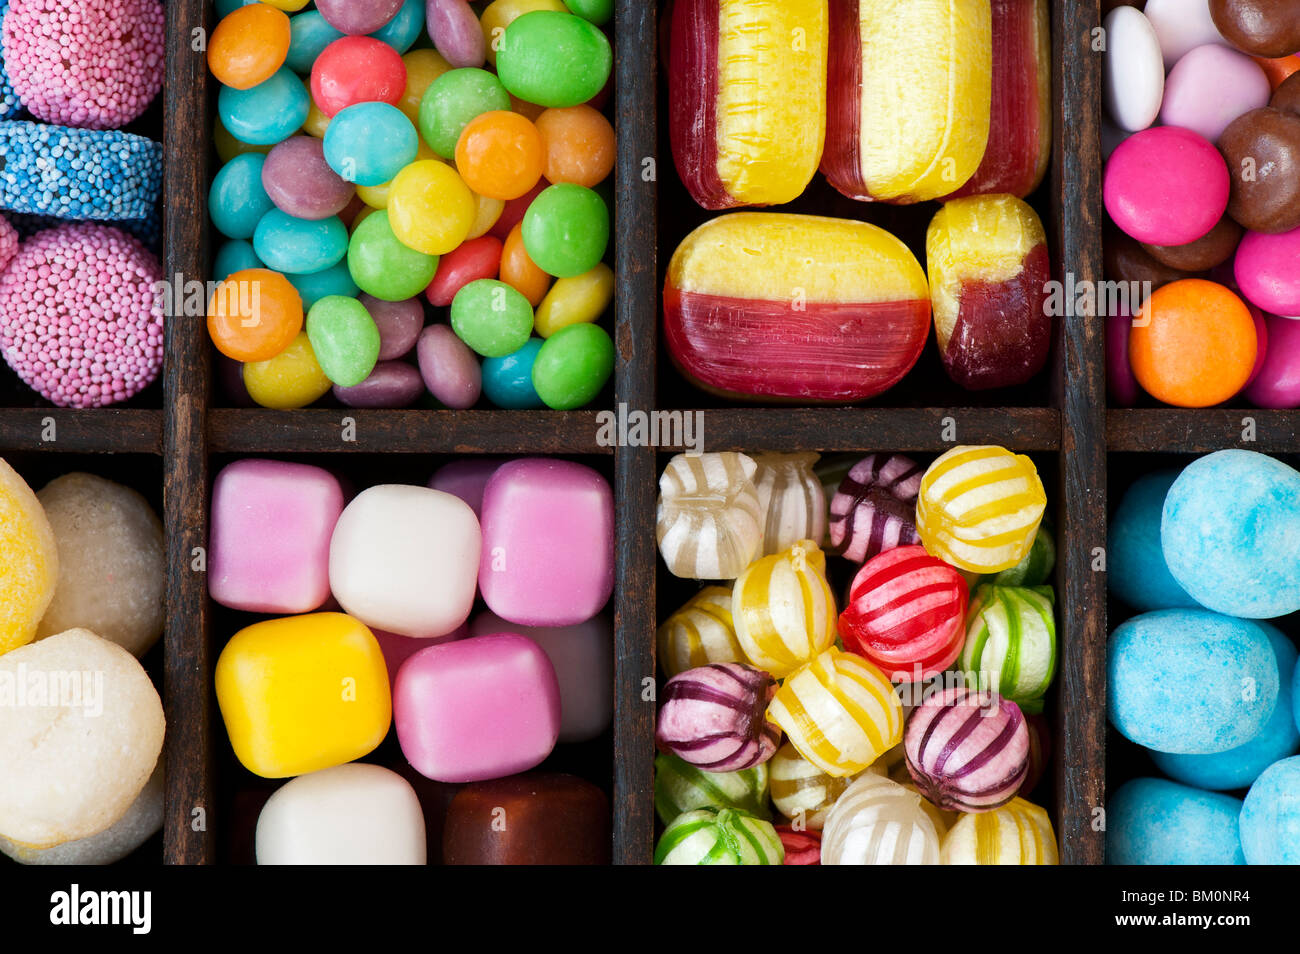 Colourful assorted childrens sweets and candy in a wooden tray Stock Photo